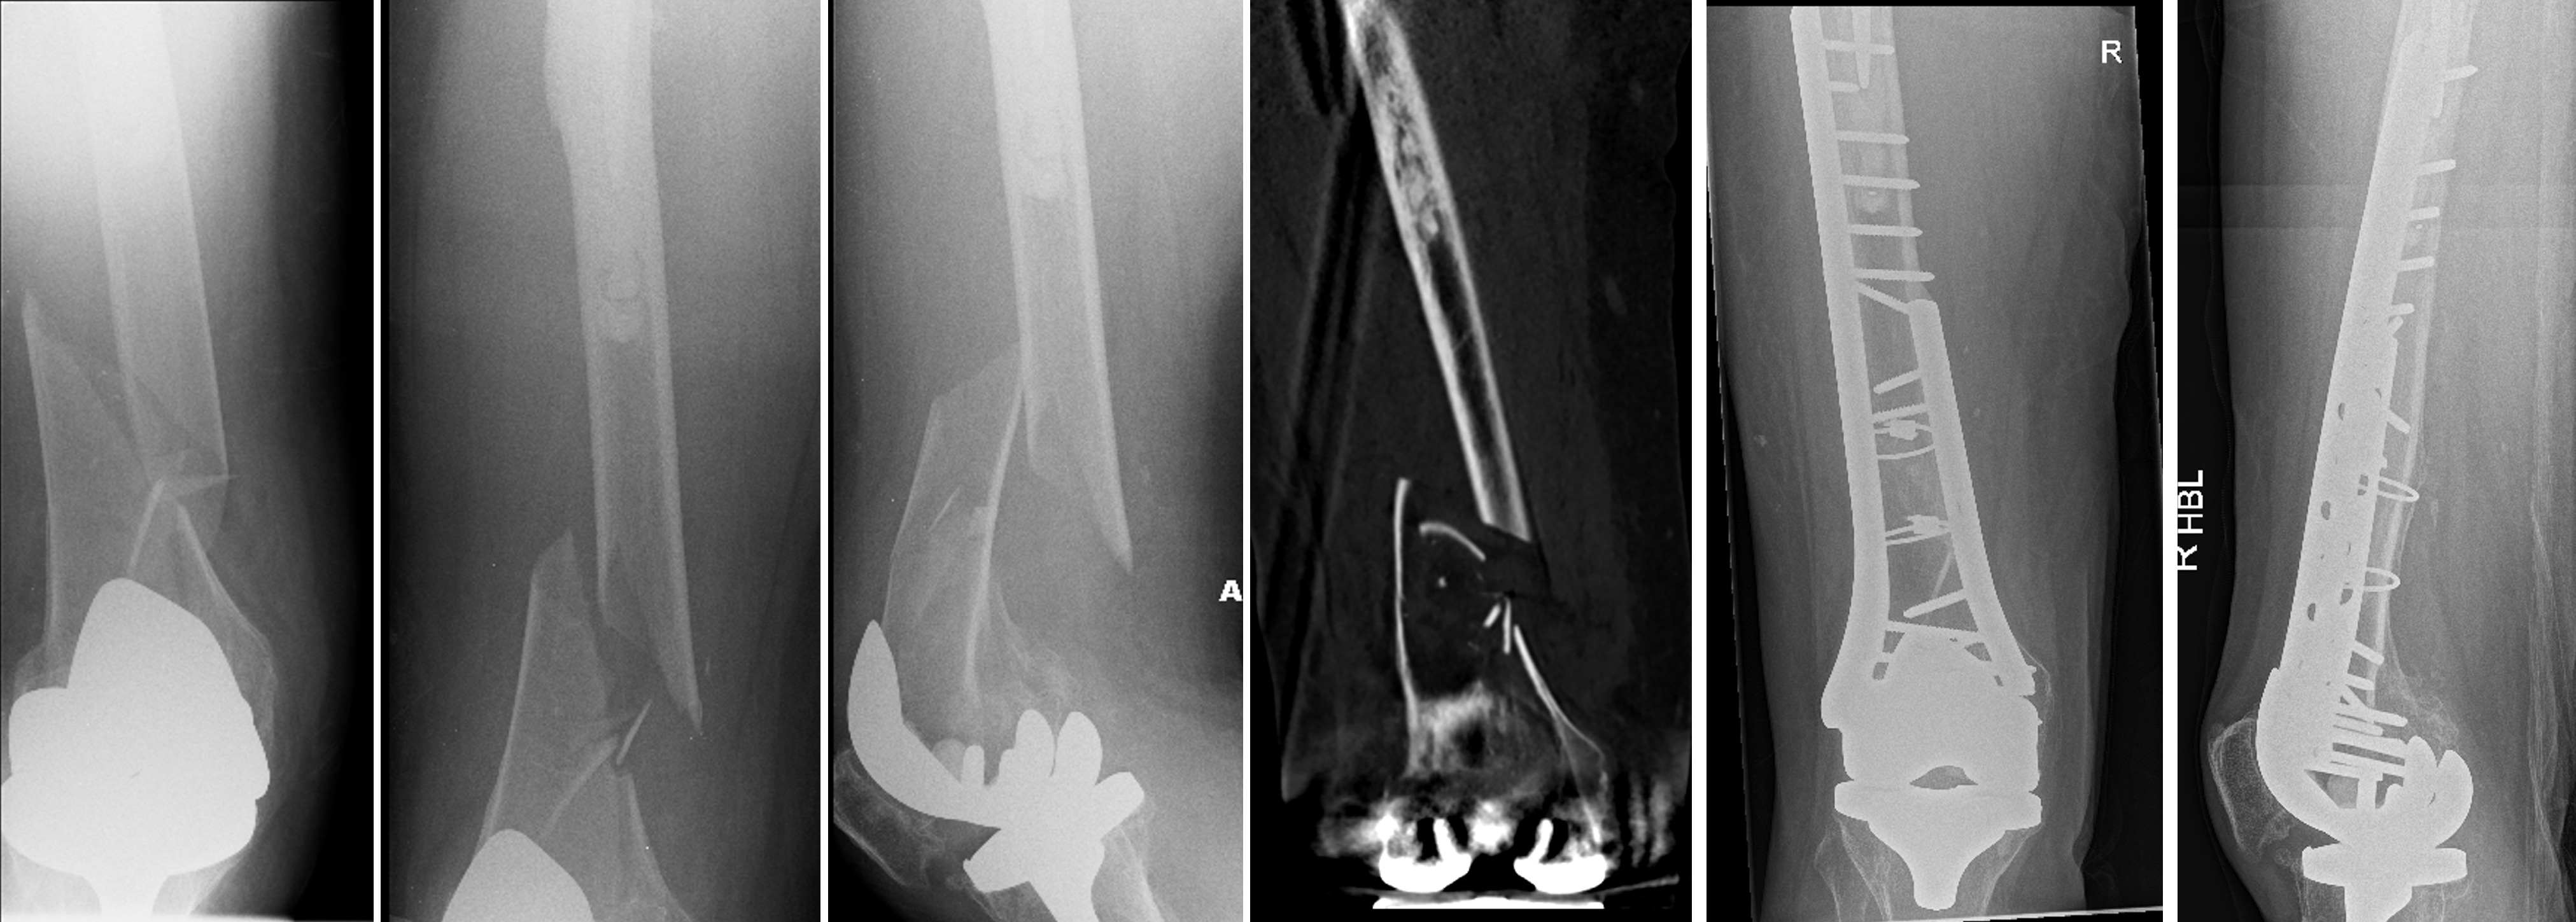 Fig. 3 
          Double plating for treatment of an interprosthetic distal femur fracture of an 88-year-old female with anatomical reduction and satisfactory healing. The anteroposterior and lateral radiographs and coronal CT demonstrate metaphyseal comminution preoperatively, but no sagittal split. Postoperative radiographs (taken at 47 months) demonstrate union.
        